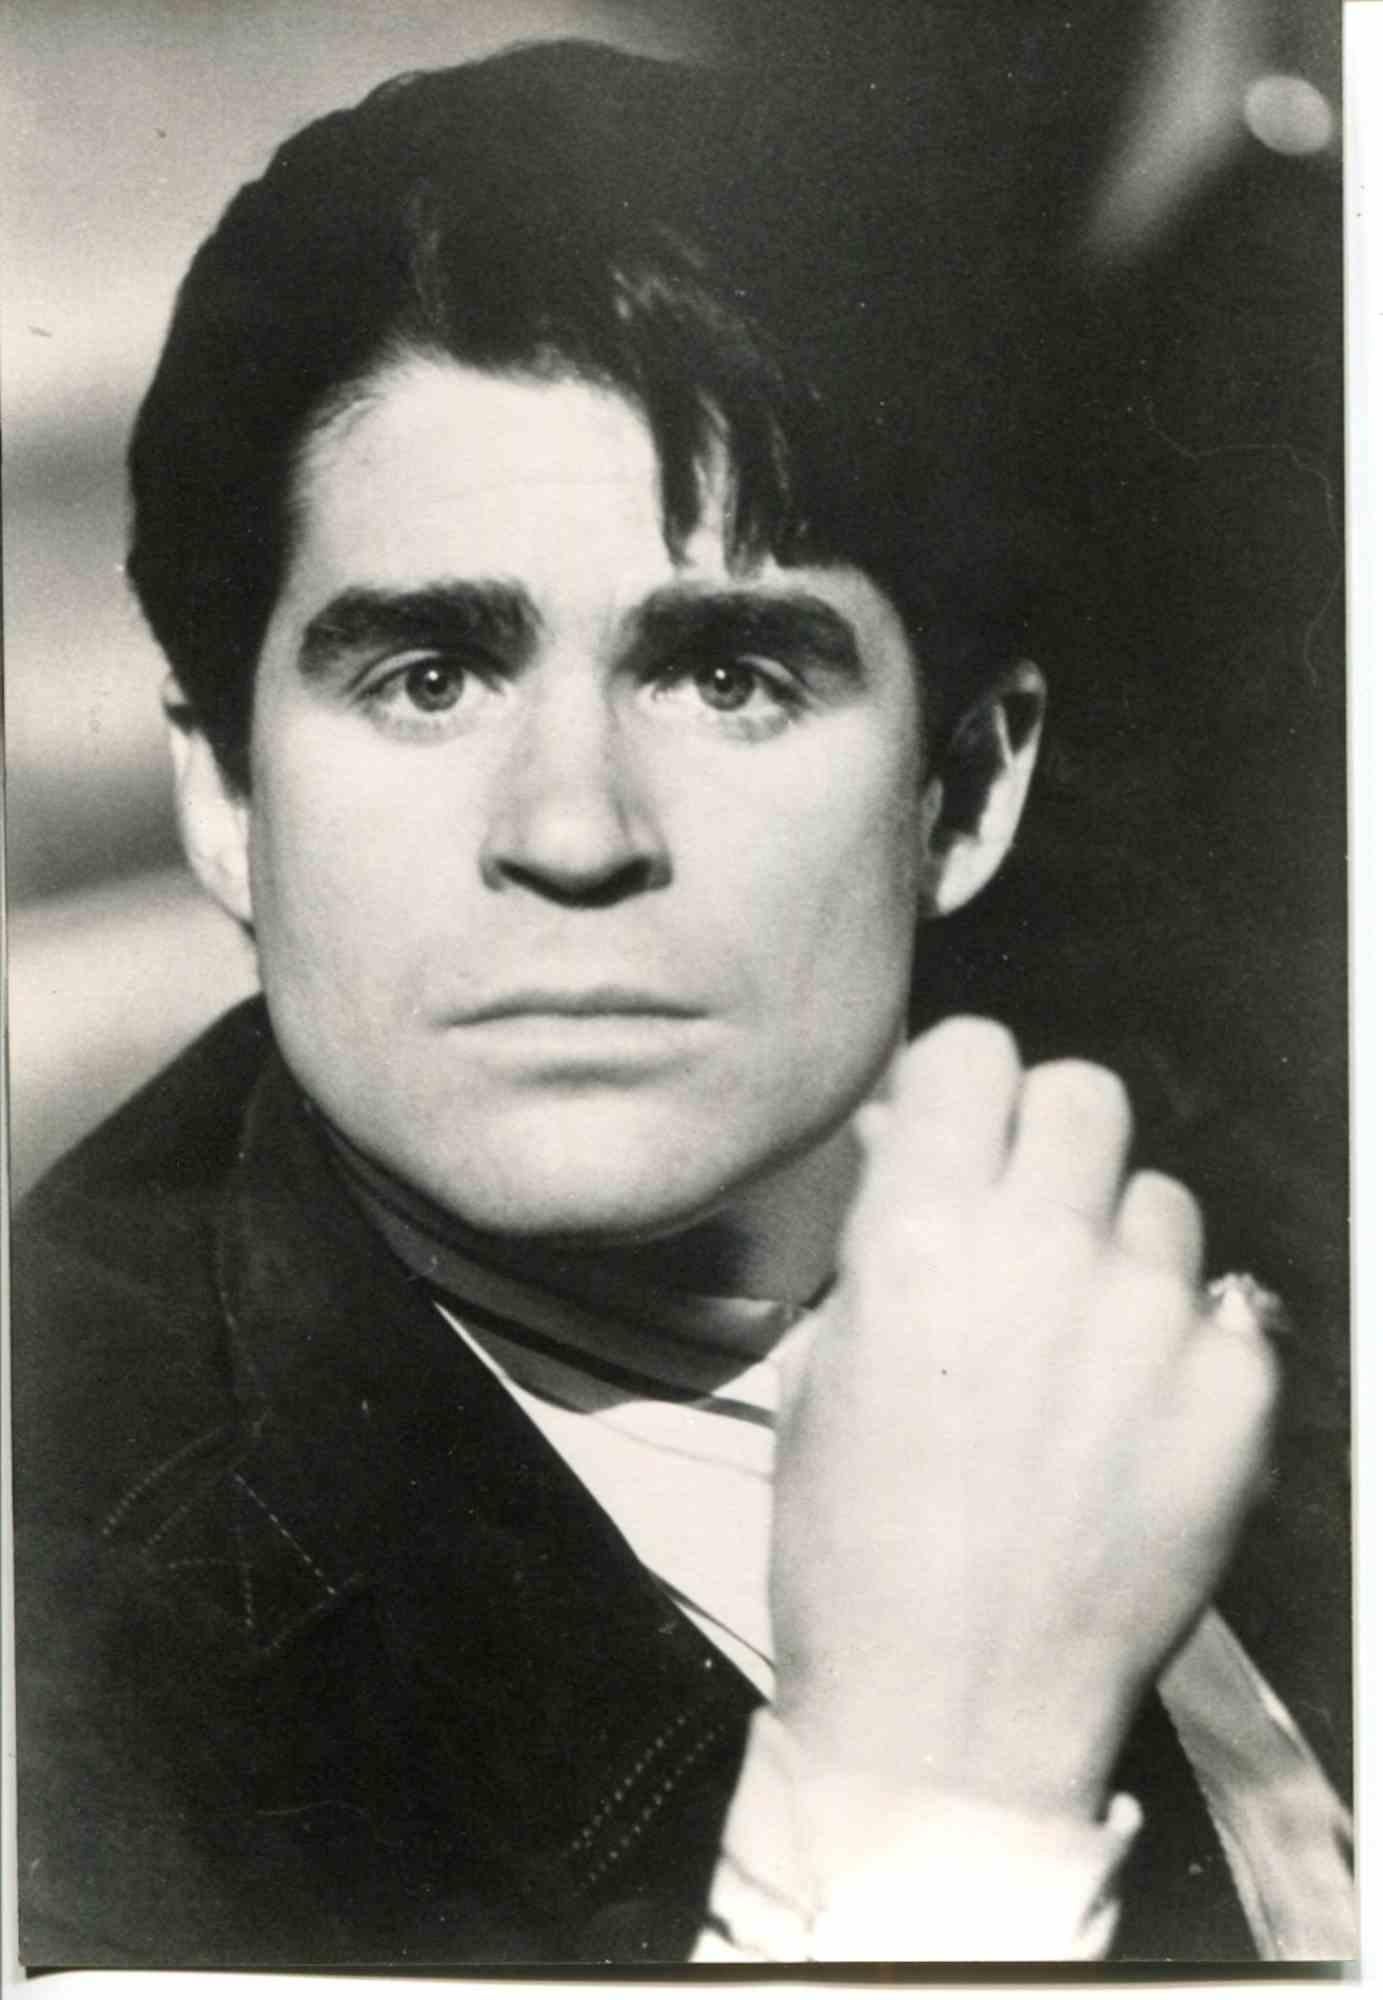 Unknown Portrait Photograph - Treat Williams in Prince of the City - Photo - 1981